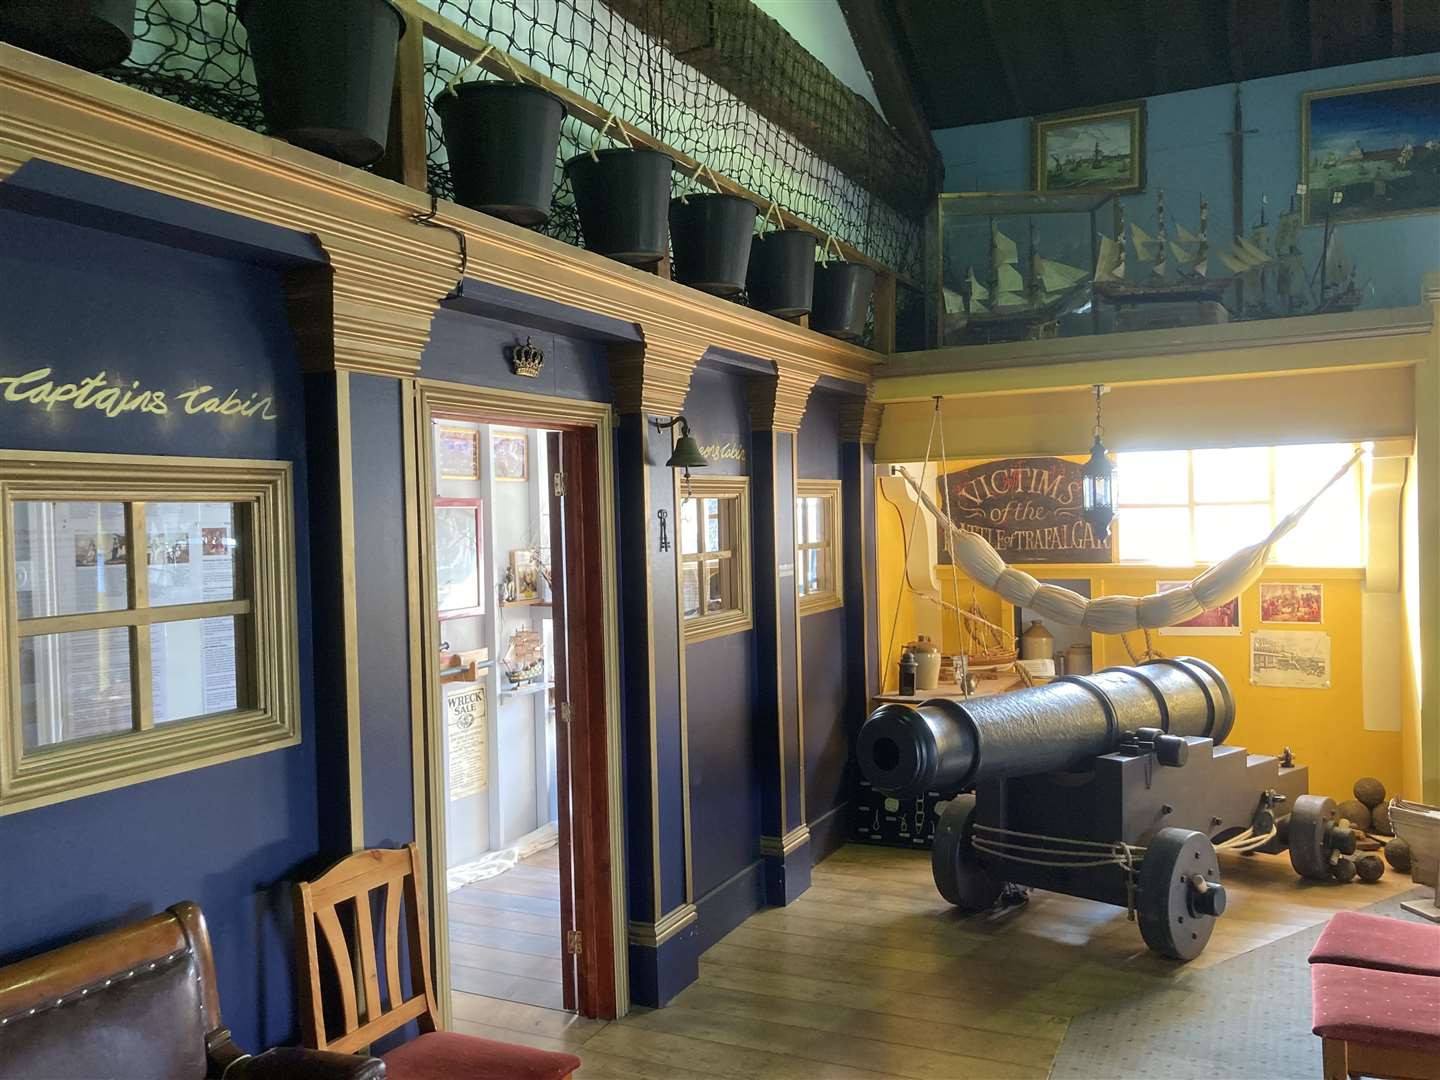 The maritime room at the Blue Town Heritage Centre and Criterion Theatre is a mock-up of Lord Nelson's HMS Victory